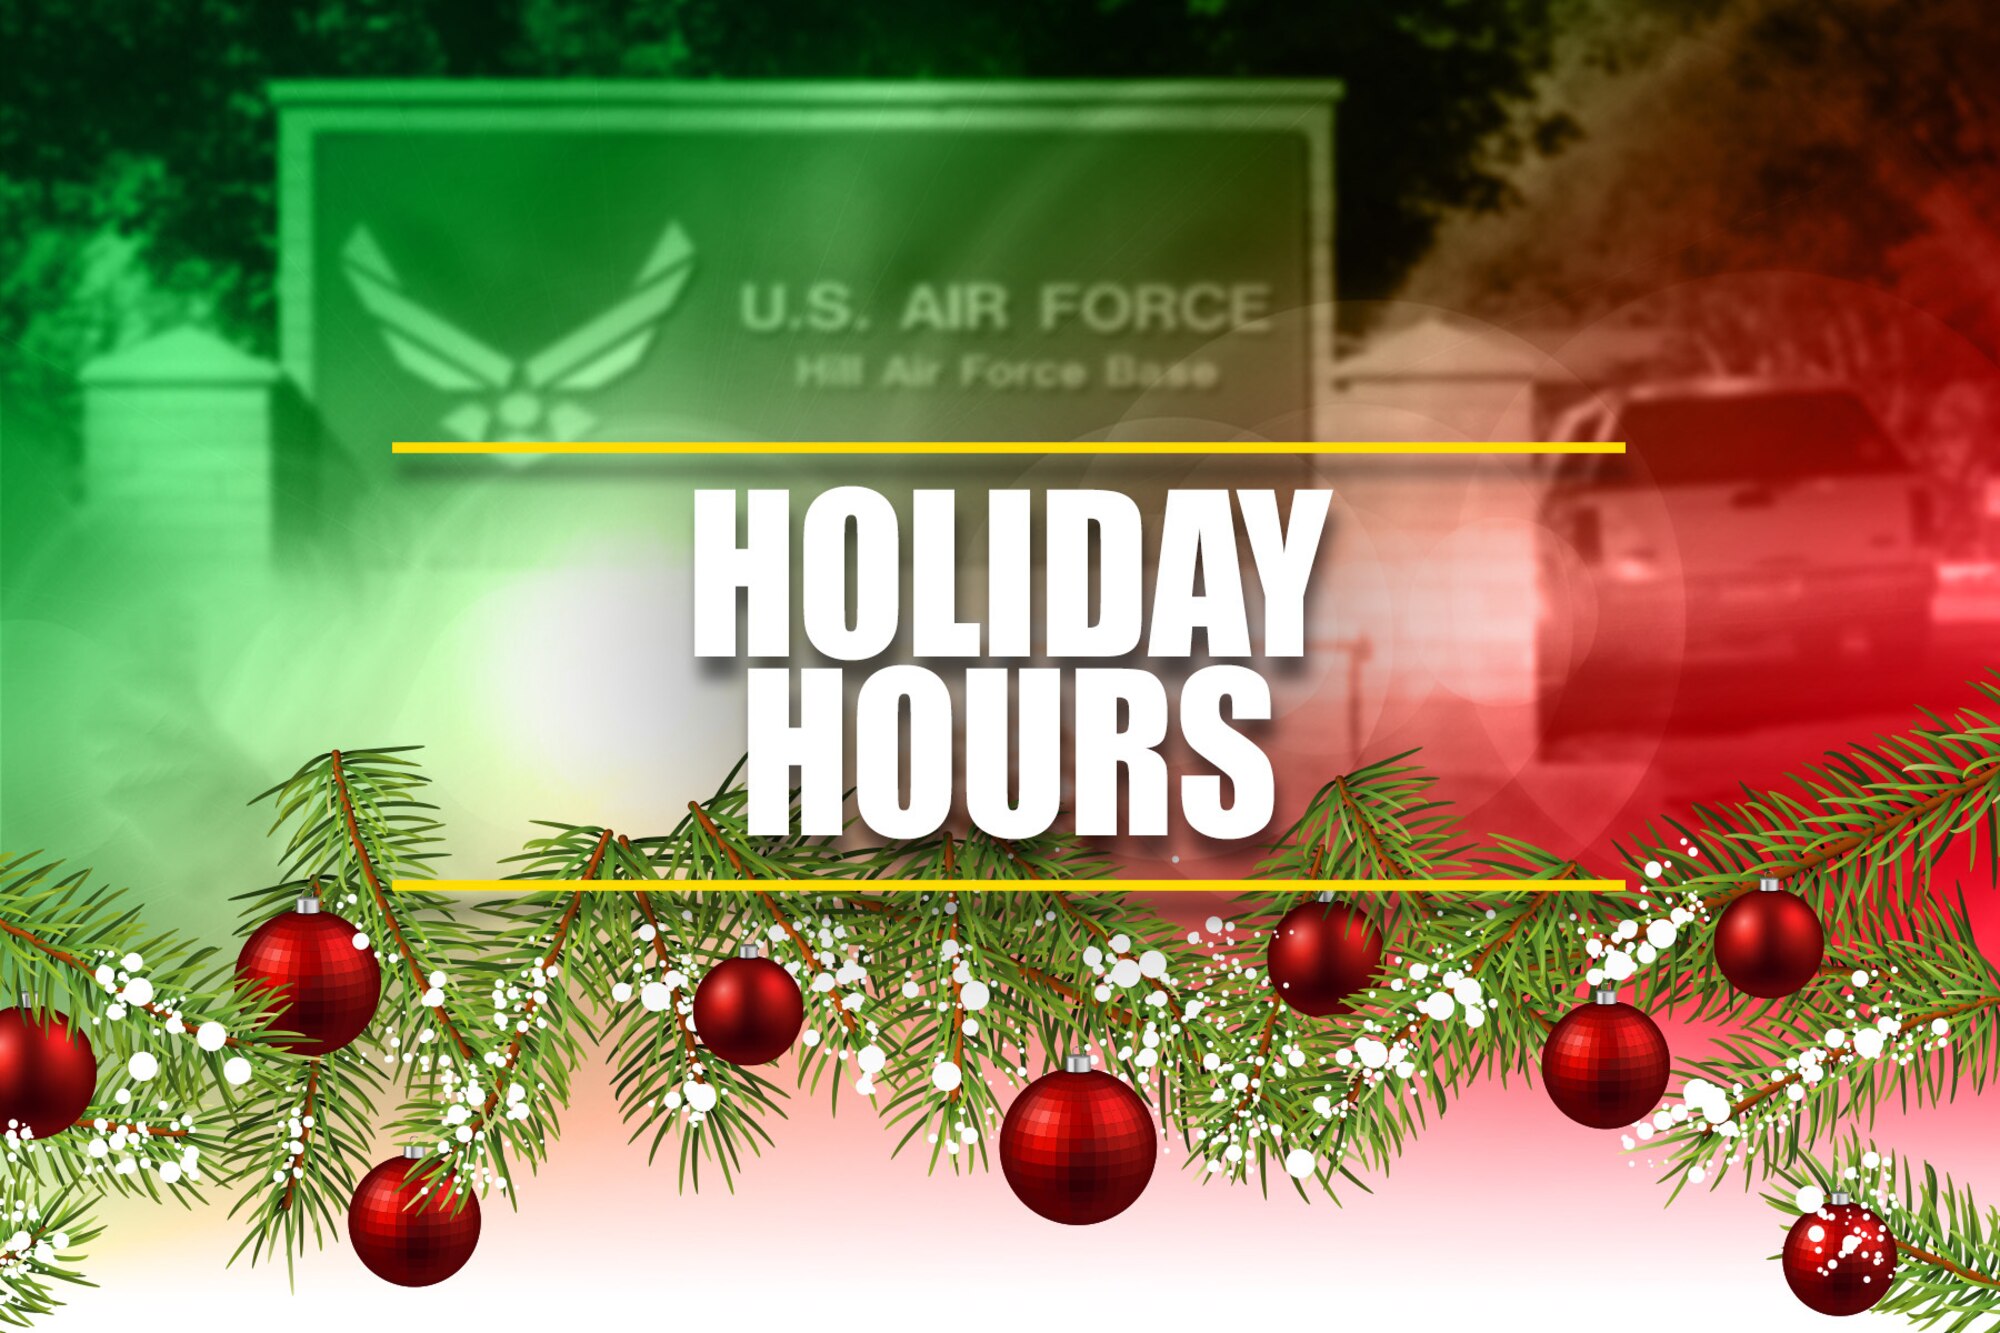 Air force symbol with pine bows and red ornaments hanging